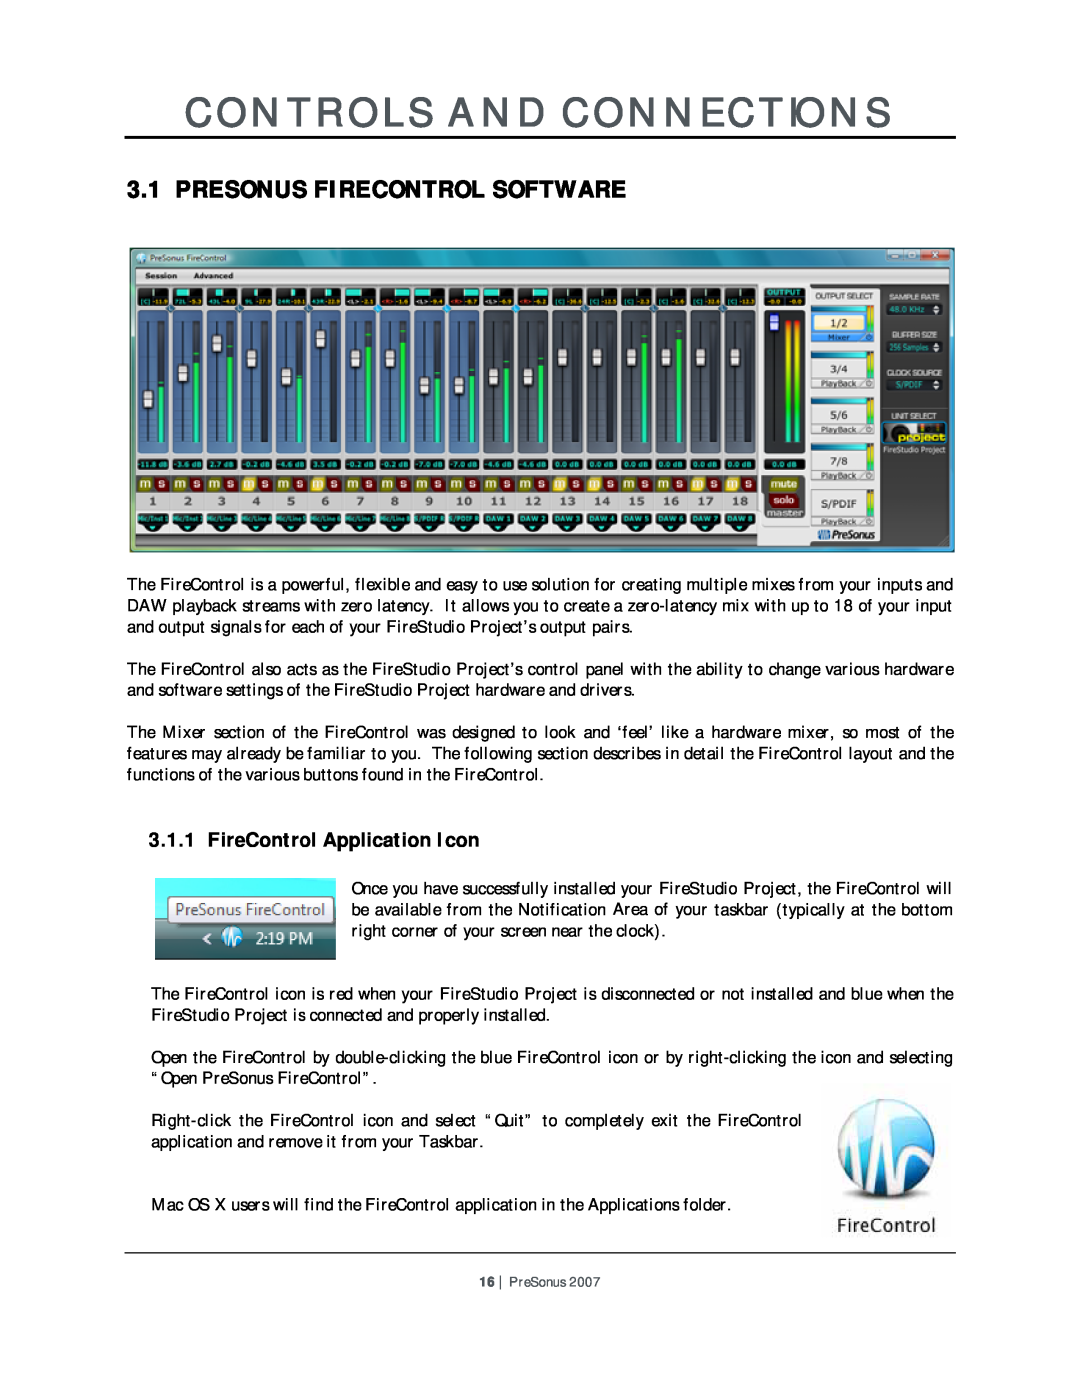 Presonus Audio electronic Microphone Preamplifier user manual Controls And Connections, Presonus Firecontrol Software 